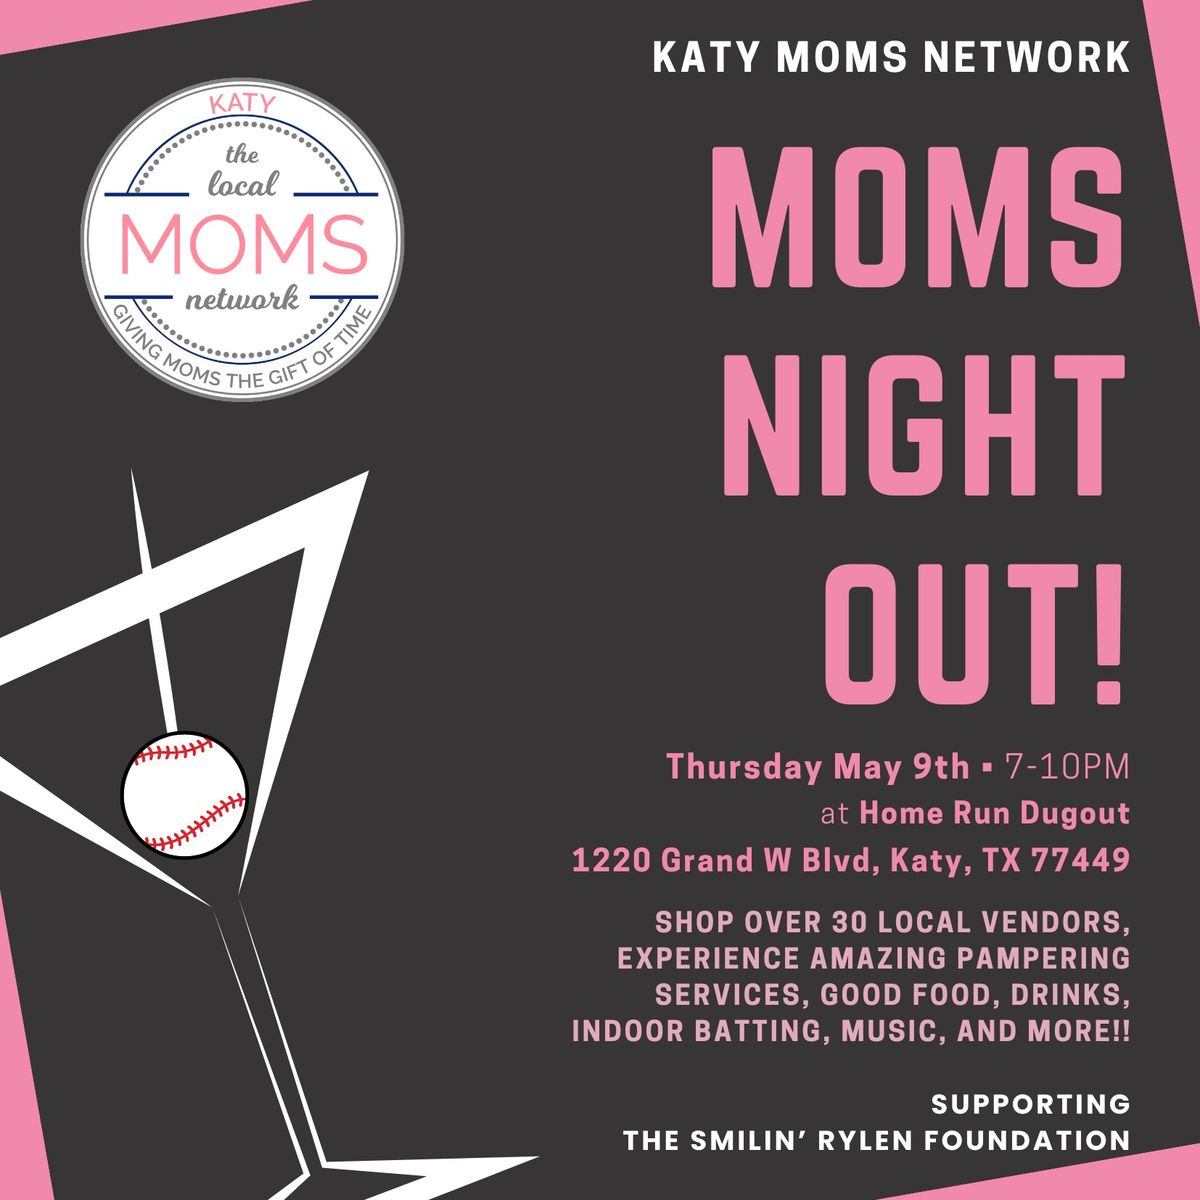 Katy Moms Night Out at Home Run Dugout